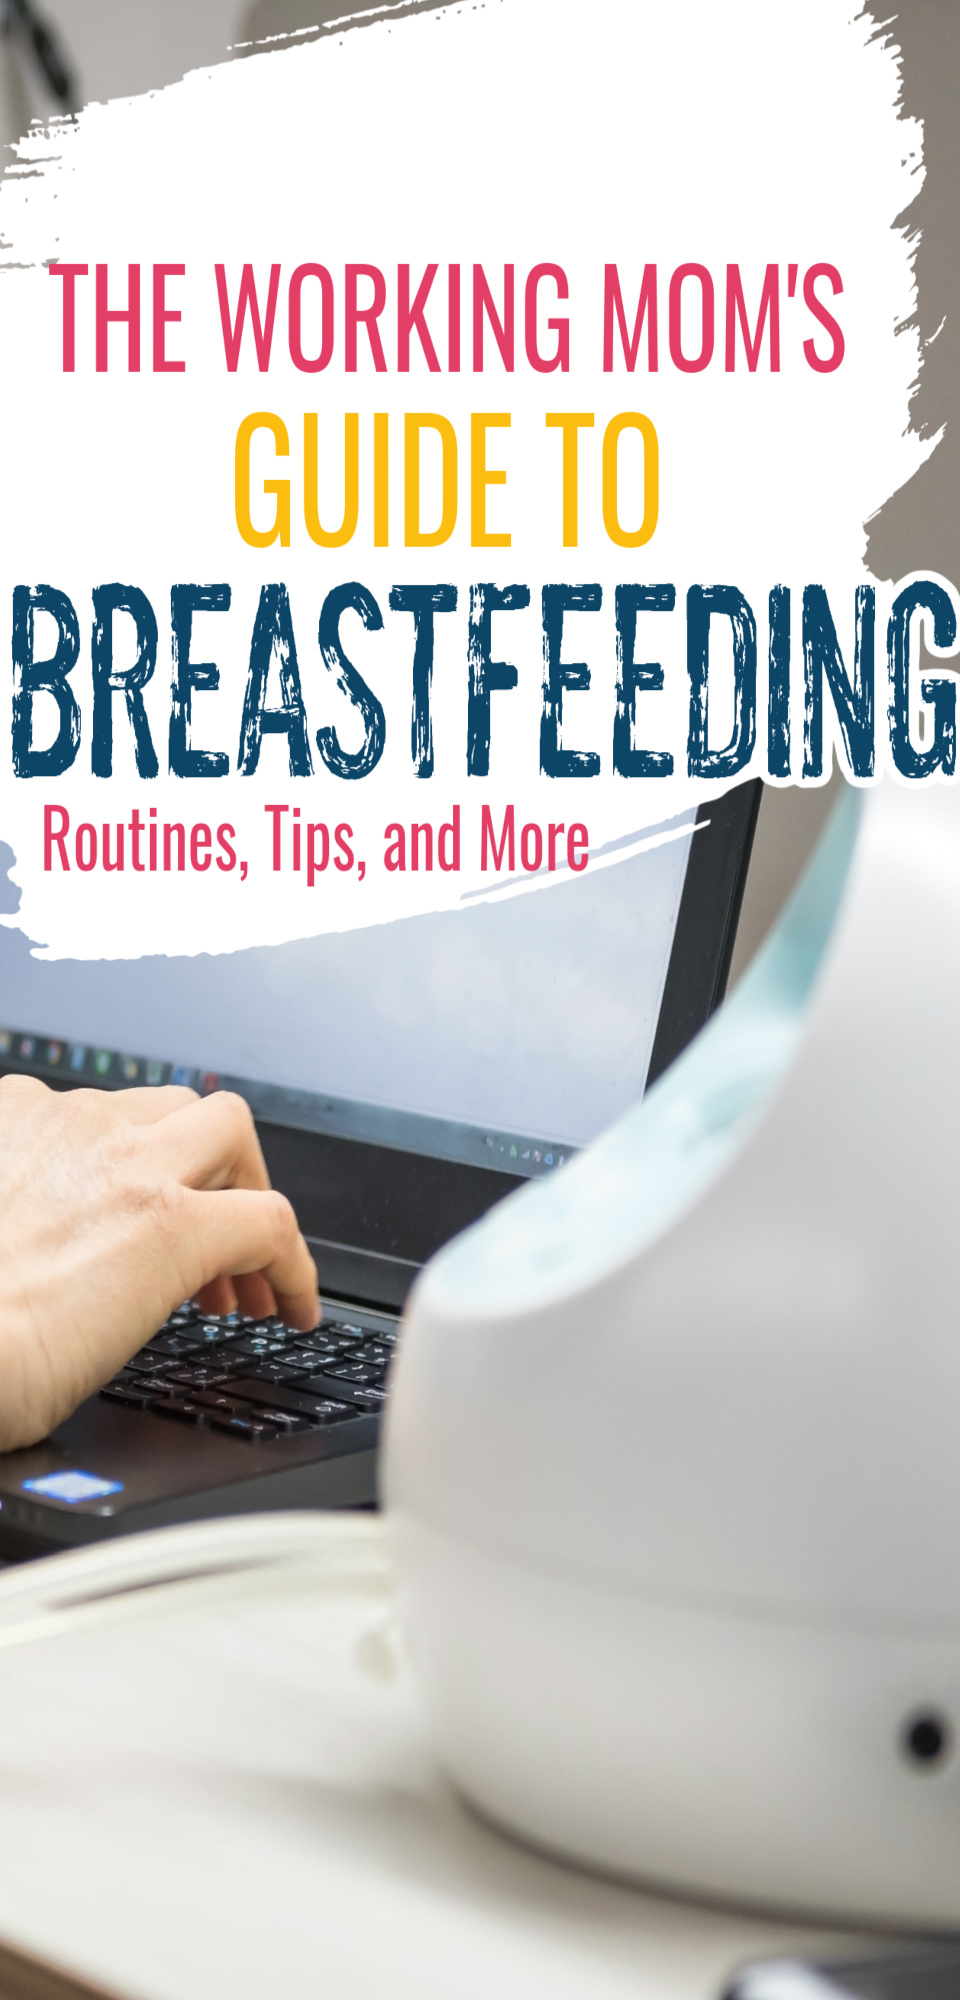 WORKING MOM'S GUIDE TO BREASTFEEDING